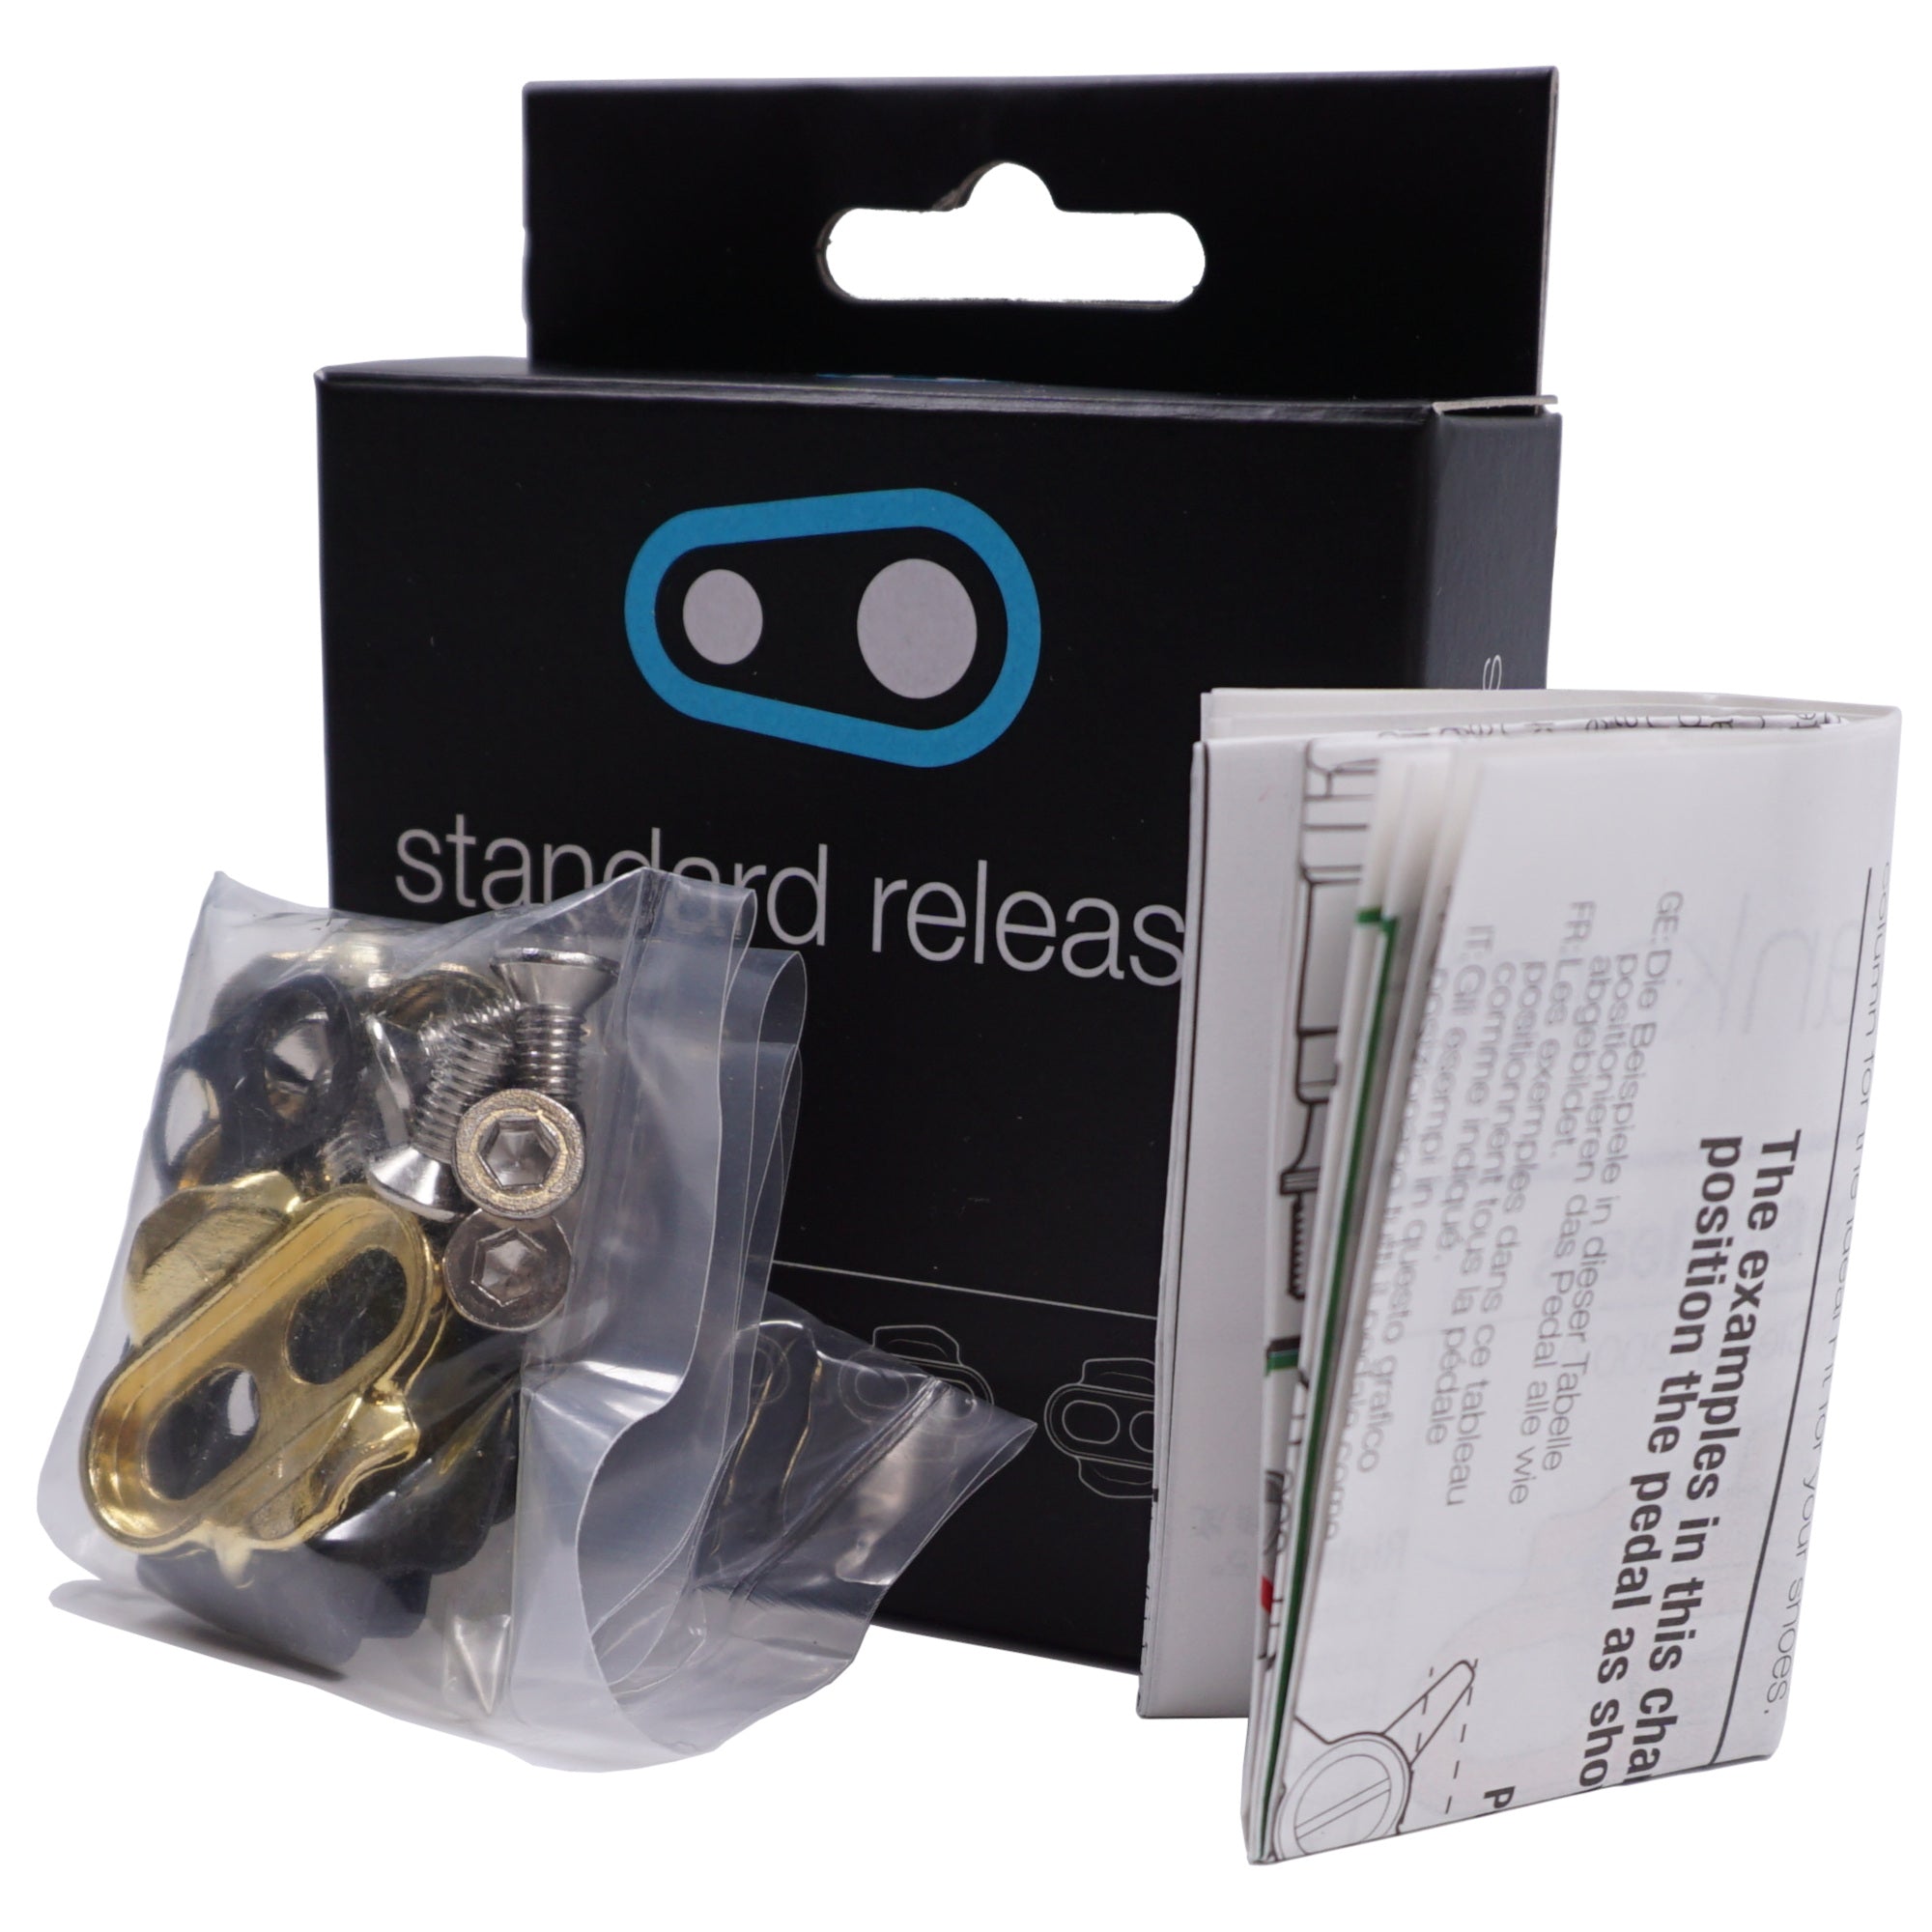 Crank Brothers Standard Release Premium Cleat Kit